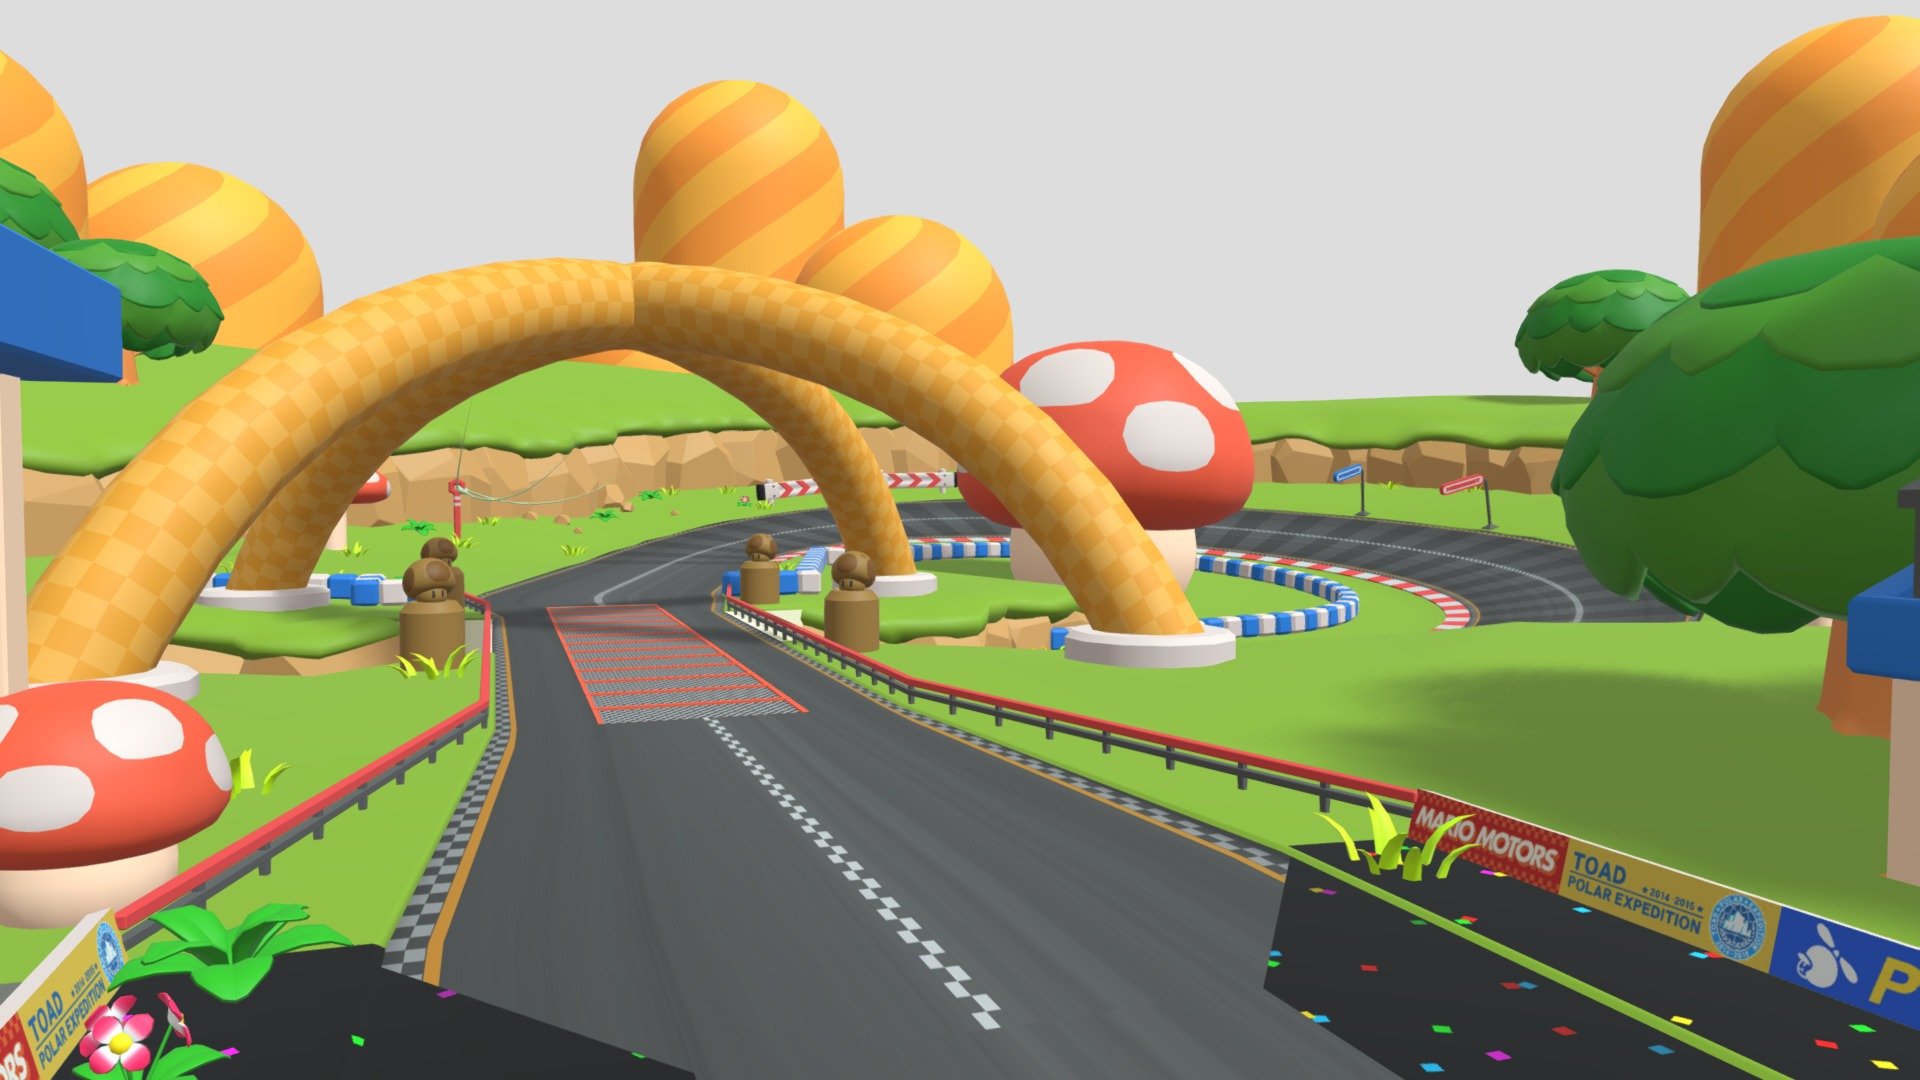 3ds Toad Circuit Tour Model Download Free 3d Model By Calebpointer Calebpointeryt 2486